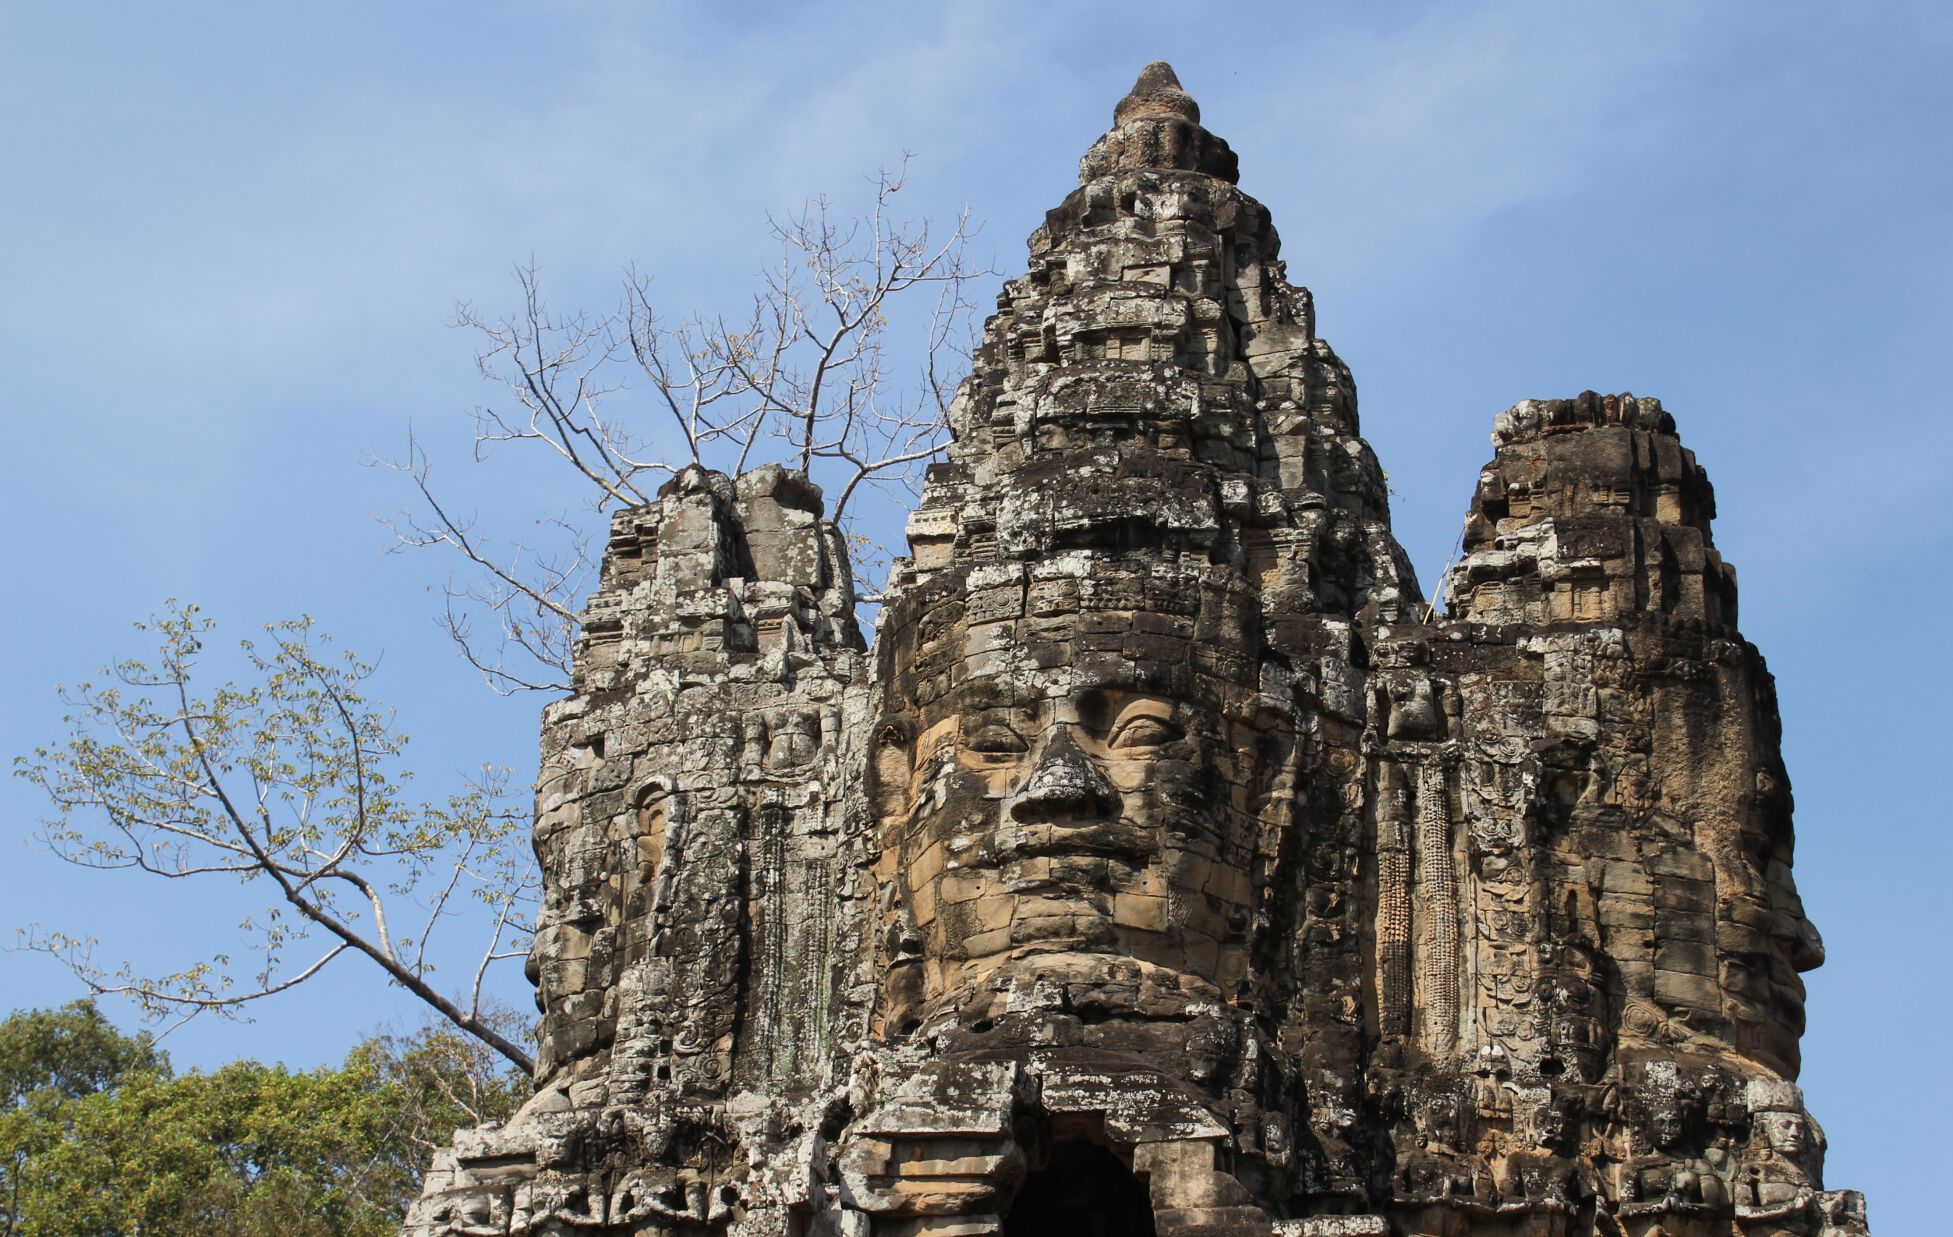 A stone face stands guard above one of the entrance gates to Angkor.